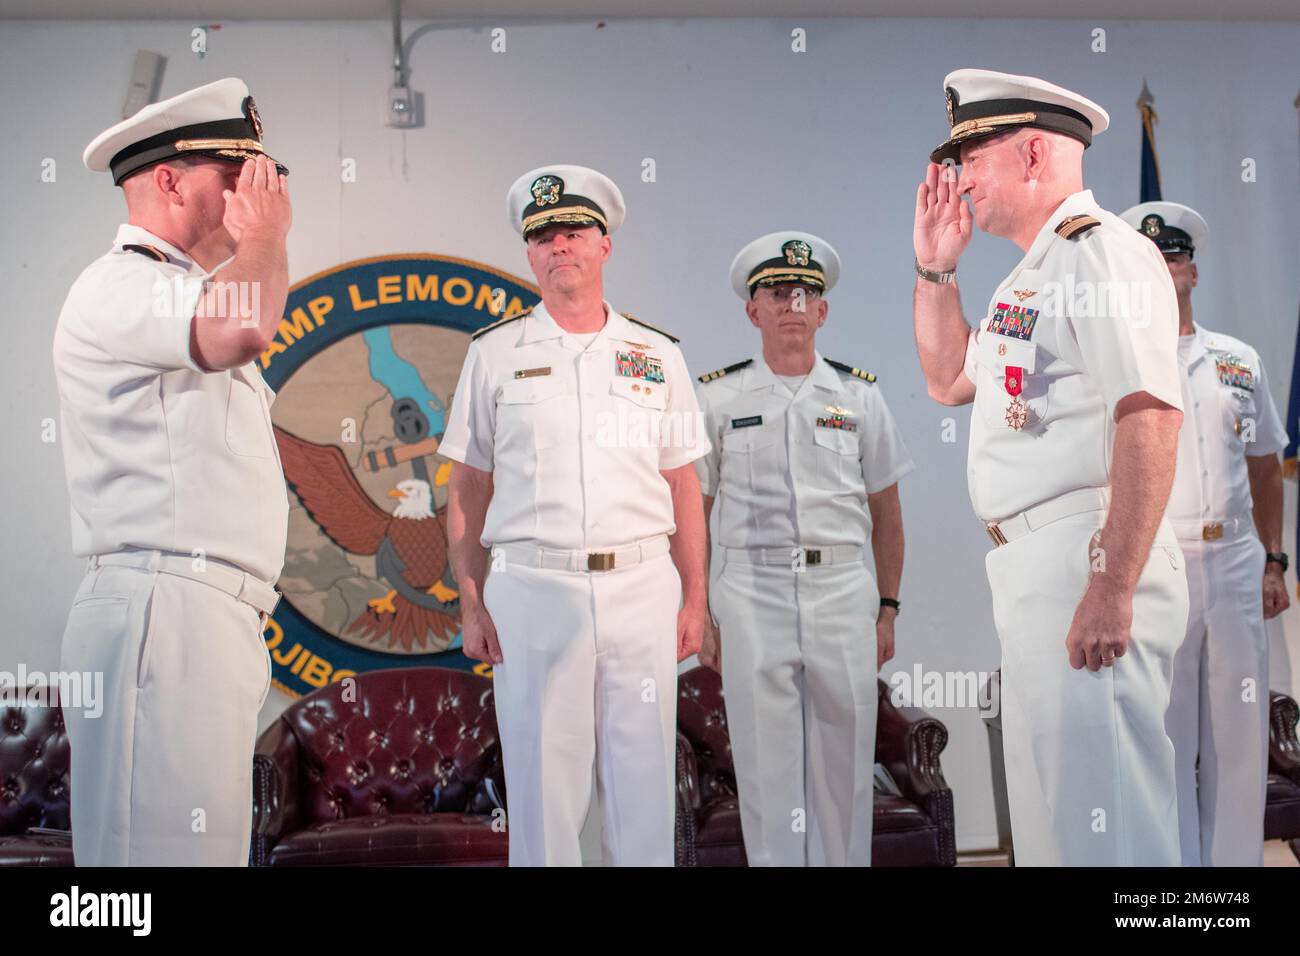 CAMP LEMONNIER, Djibouti (May 6, 2022) U.S. Navy Capt. Brian R. Iber  (left), relieves Capt. David J. Faehnle as the commanding officer of Camp Lemonnier, Djibouti, while Rear Adm. Christopher Gray, commander Navy Region Europe, Africa, Central looks on during a ceremony on camp May 6. Stock Photo